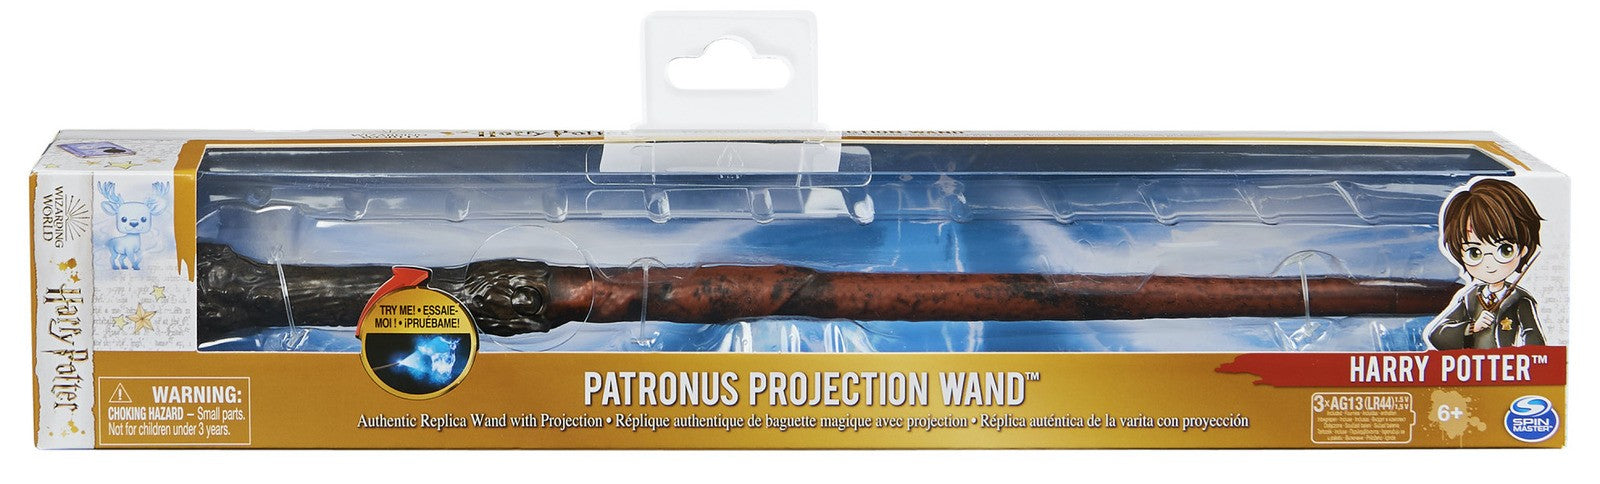 Harry Potter Patronus Projection Harry Potter Wand — ToyWauchope